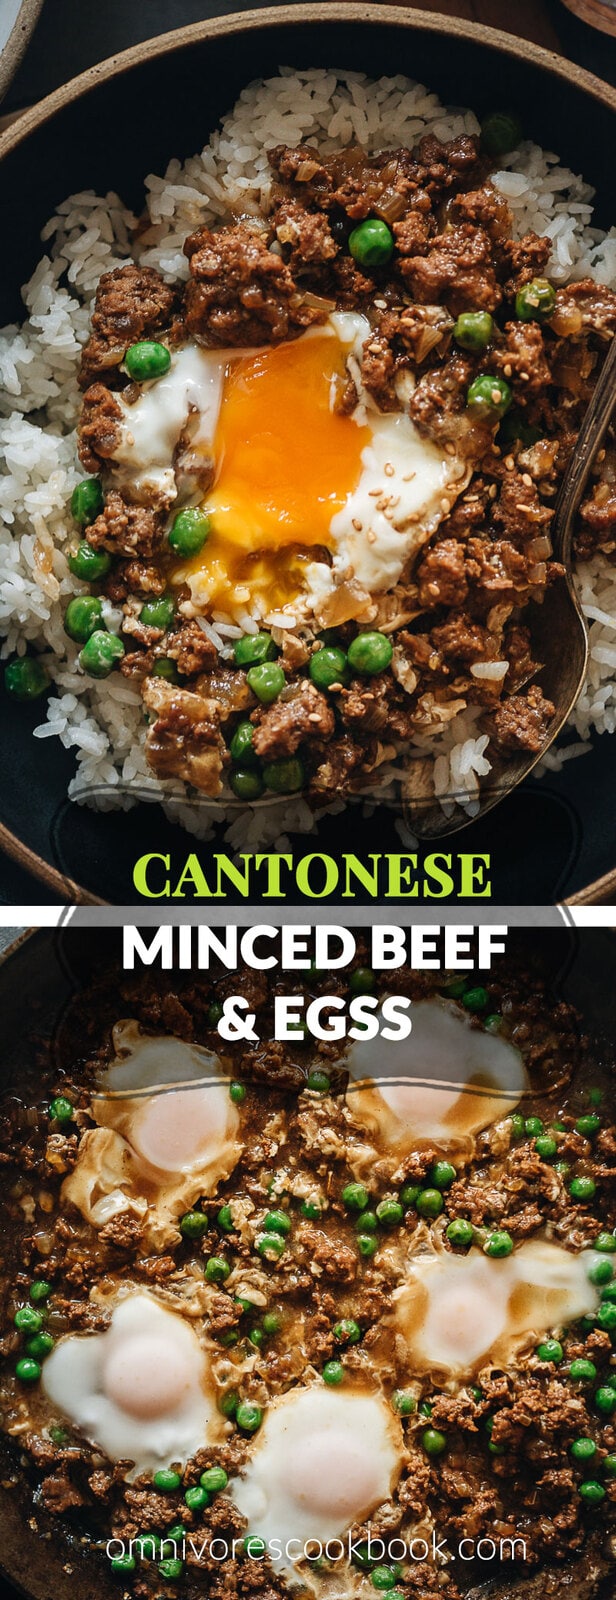 Cantonese Ground Beef Rice and Eggs | A super easy Cantonese minced beef bowl cooked with an oyster-sauce-based sauce, onion, green peas, and runny eggs. Top it on steamed rice or noodles to make a hearty and healthy meal. It’s also perfect to make ahead and use as meal-prep. {Gluten-Free Adaptable}